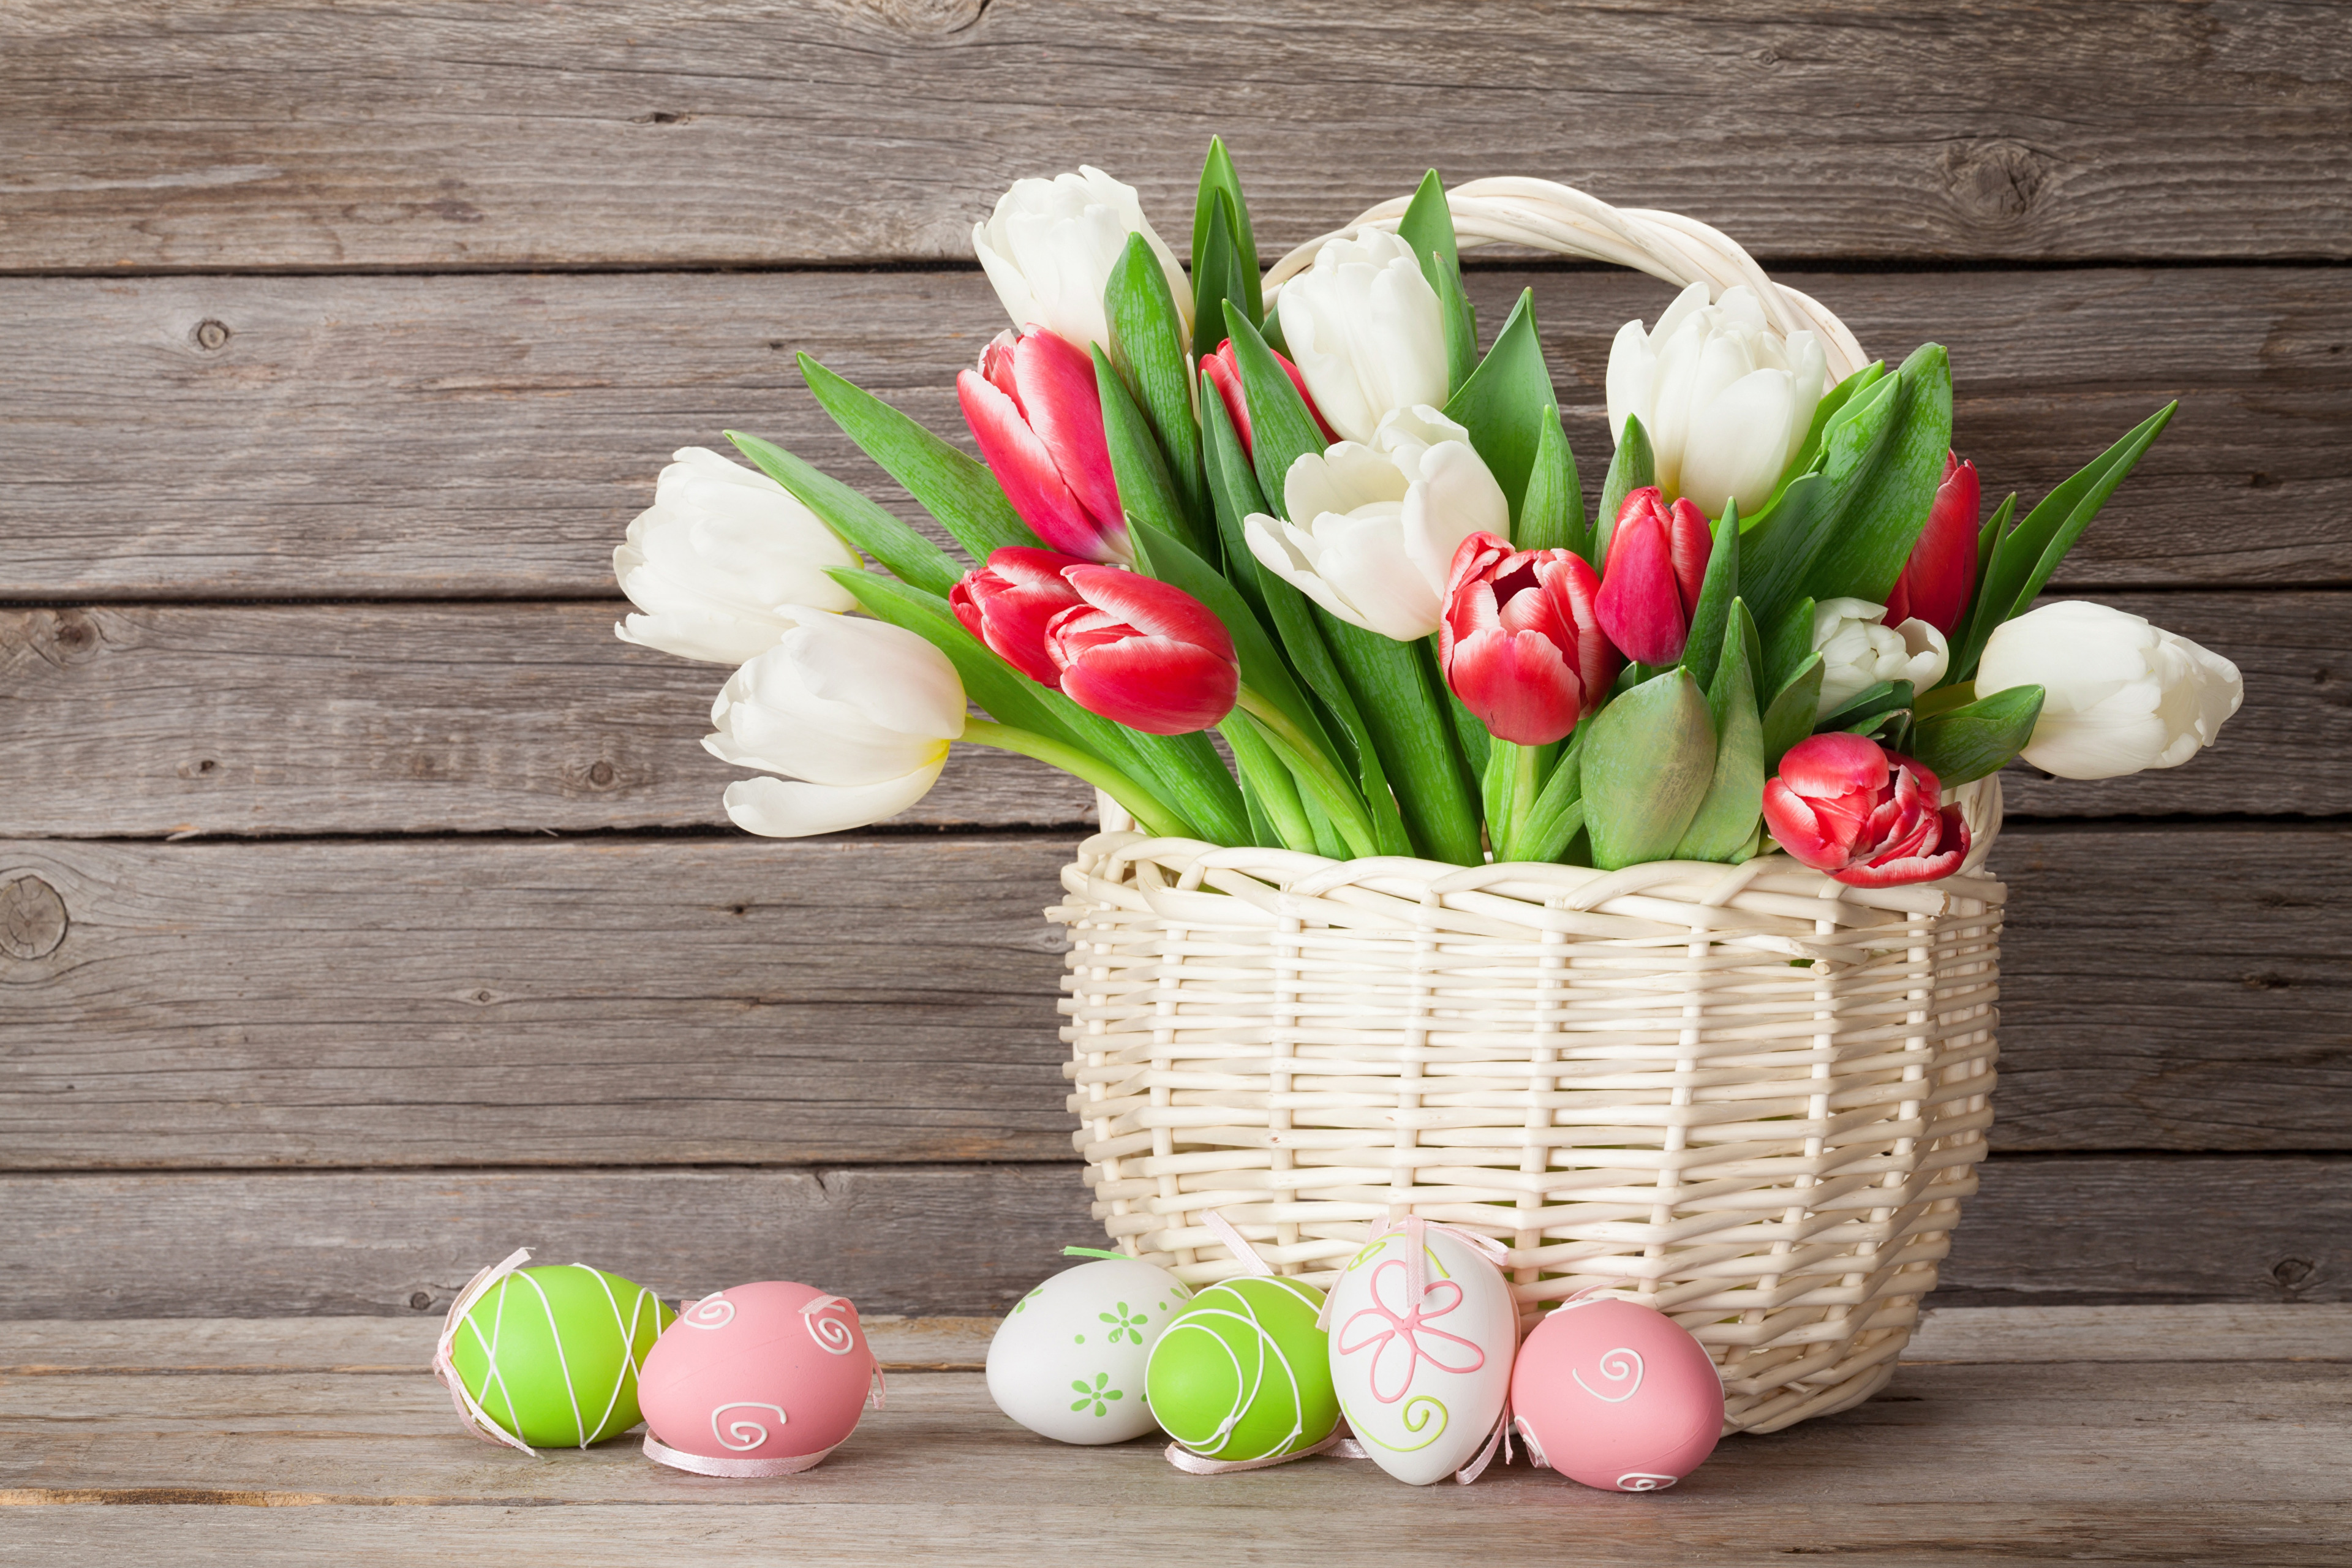 White and red tulips in a basket on a table with colorful eggs for Easter